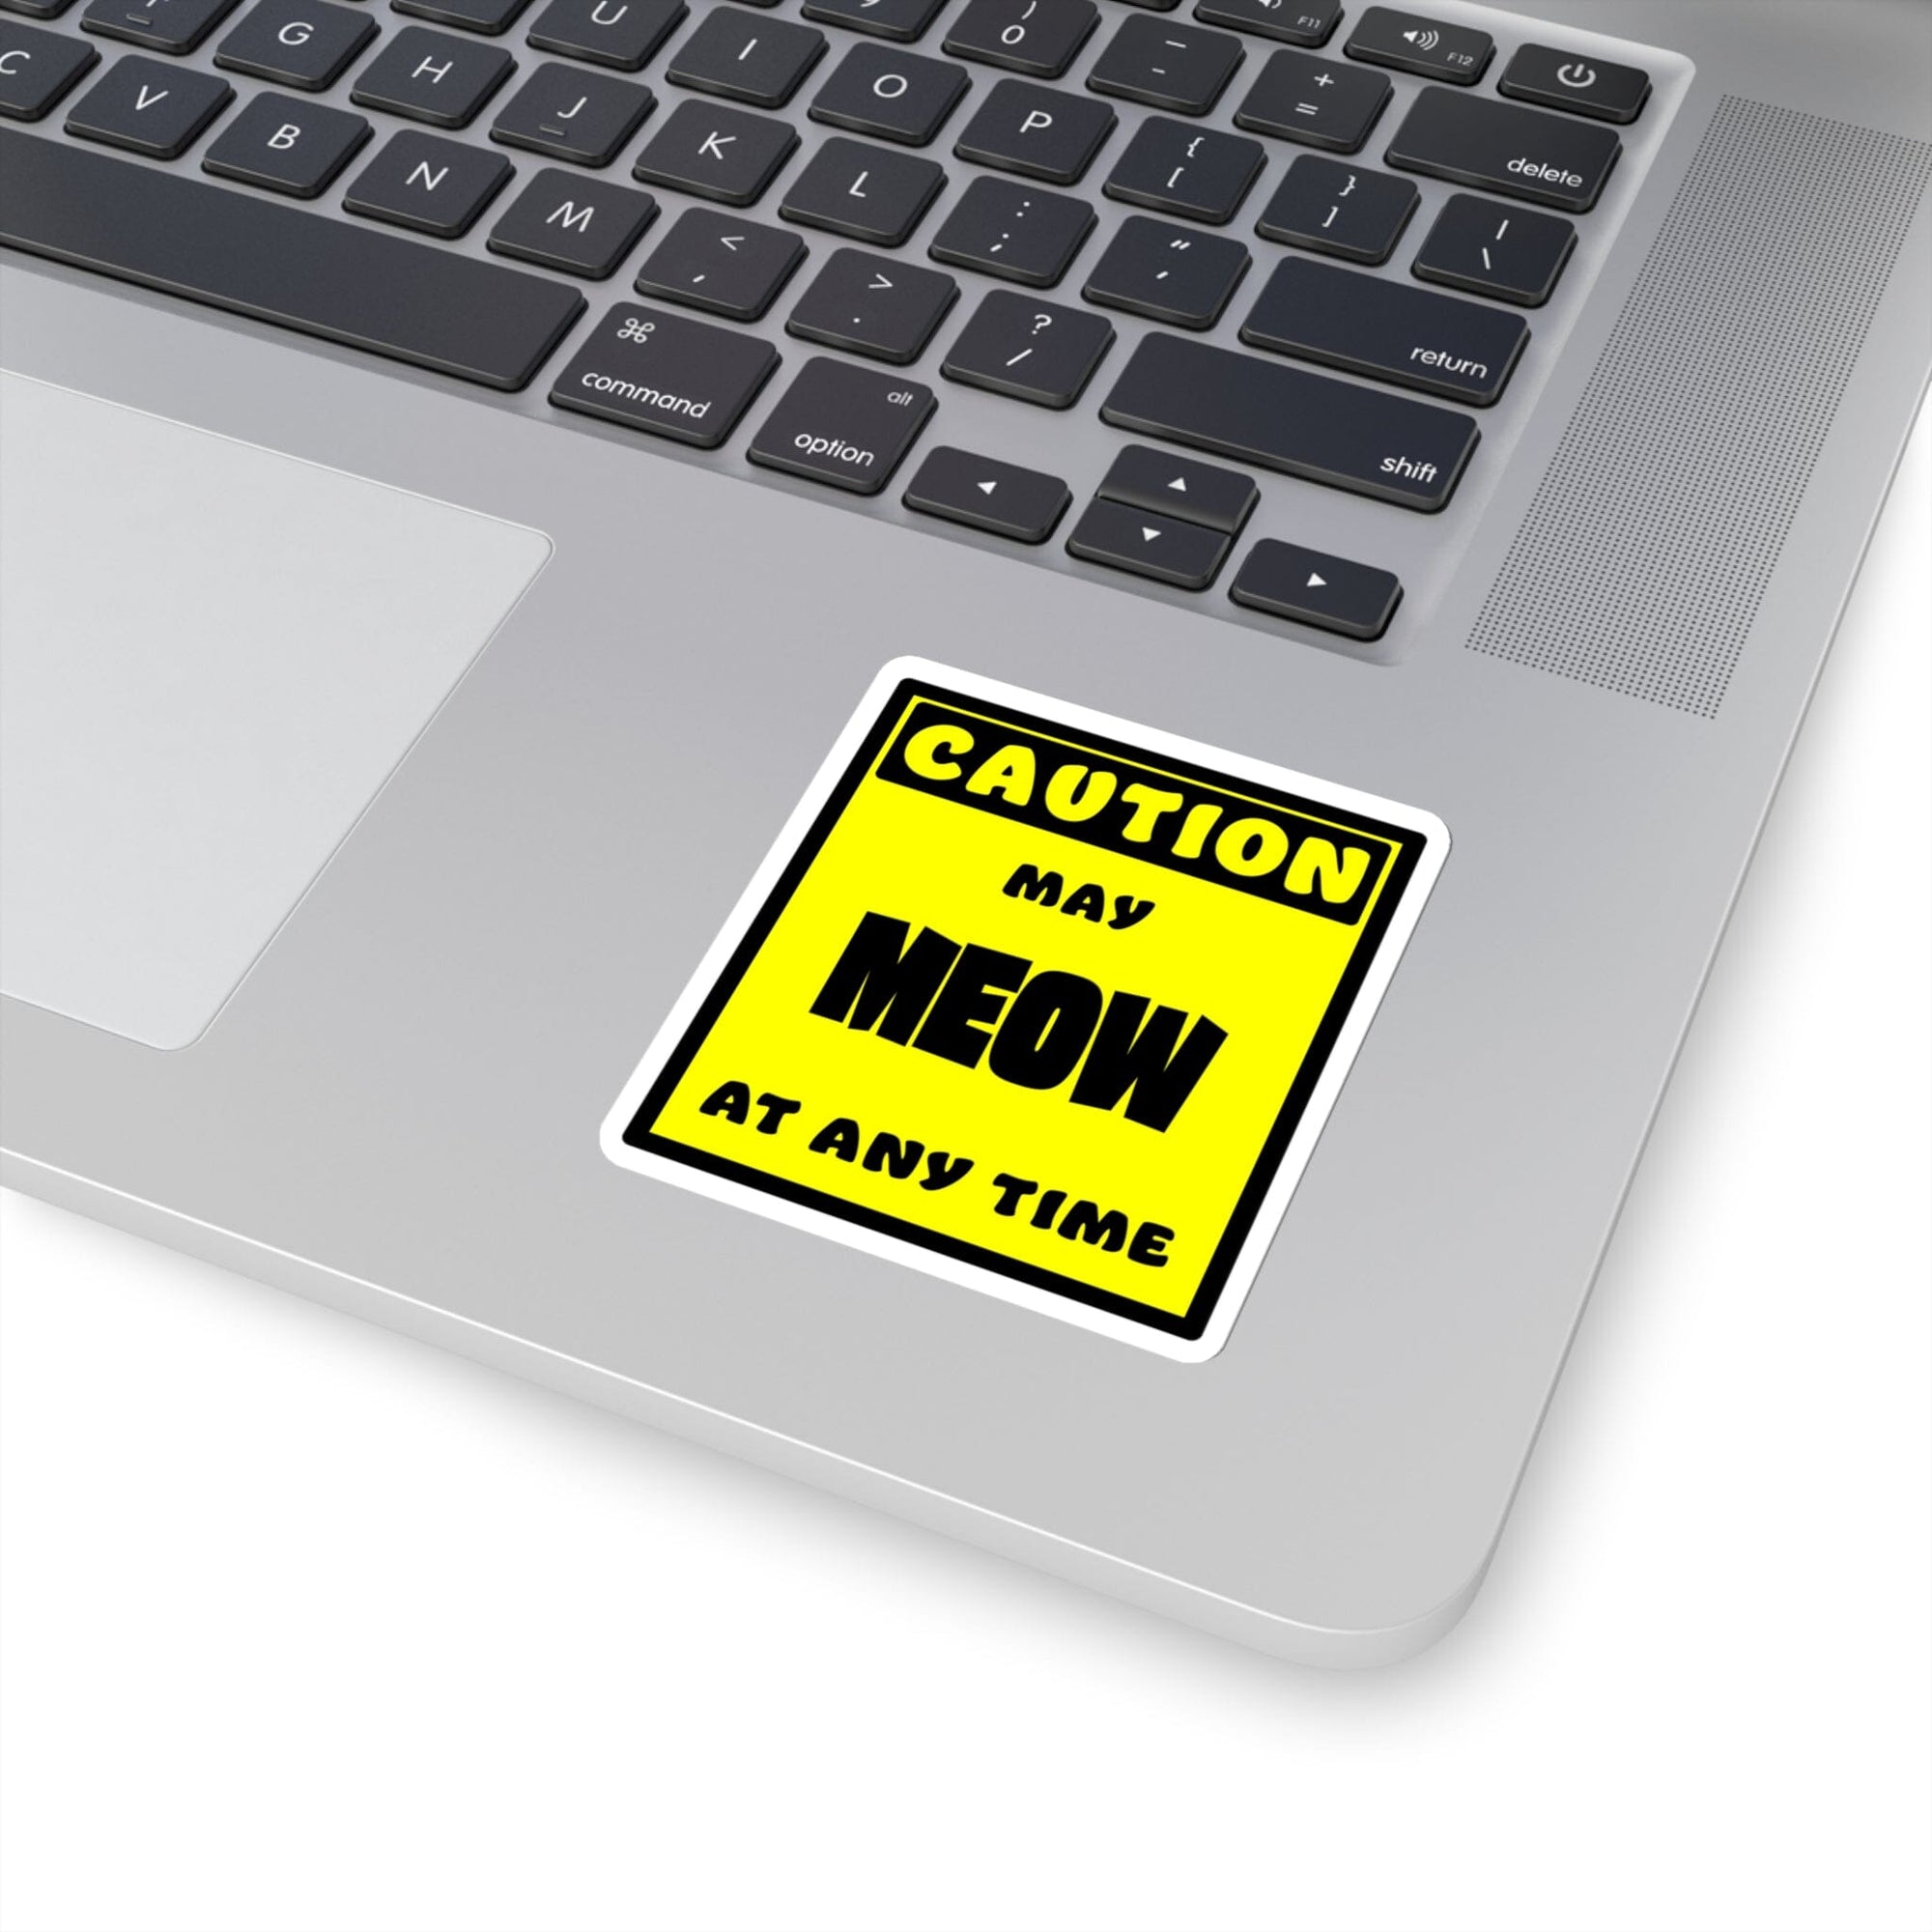 CAUTION! May MEOW at any time! - Sticker Sticker AFLT-Whootorca 